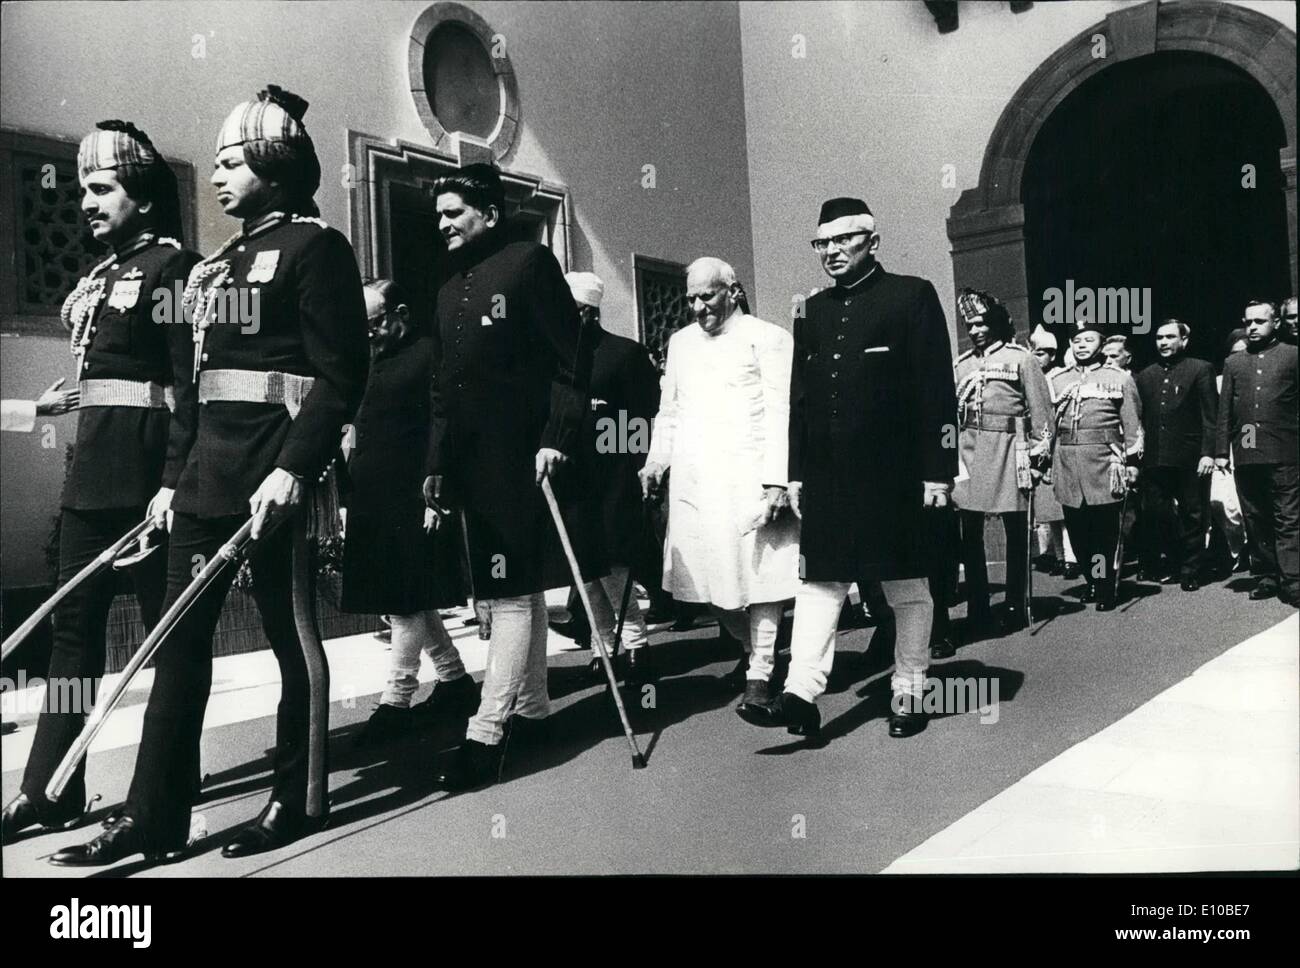 Mar. 03, 1972 - President V.V. Giri accompanied with Chairman of Rajya Sabha & Vice President of India Mr. G.S. Pathak (right, third row) and speaker of Lok Sabha (lower house of Parliament) Mr. G.S. Dhilon (partly seen) going in procession to address the joint meeting of both houses of parliament when the budget session of the Parliament began in New Delhi on Monday morning. Stock Photo